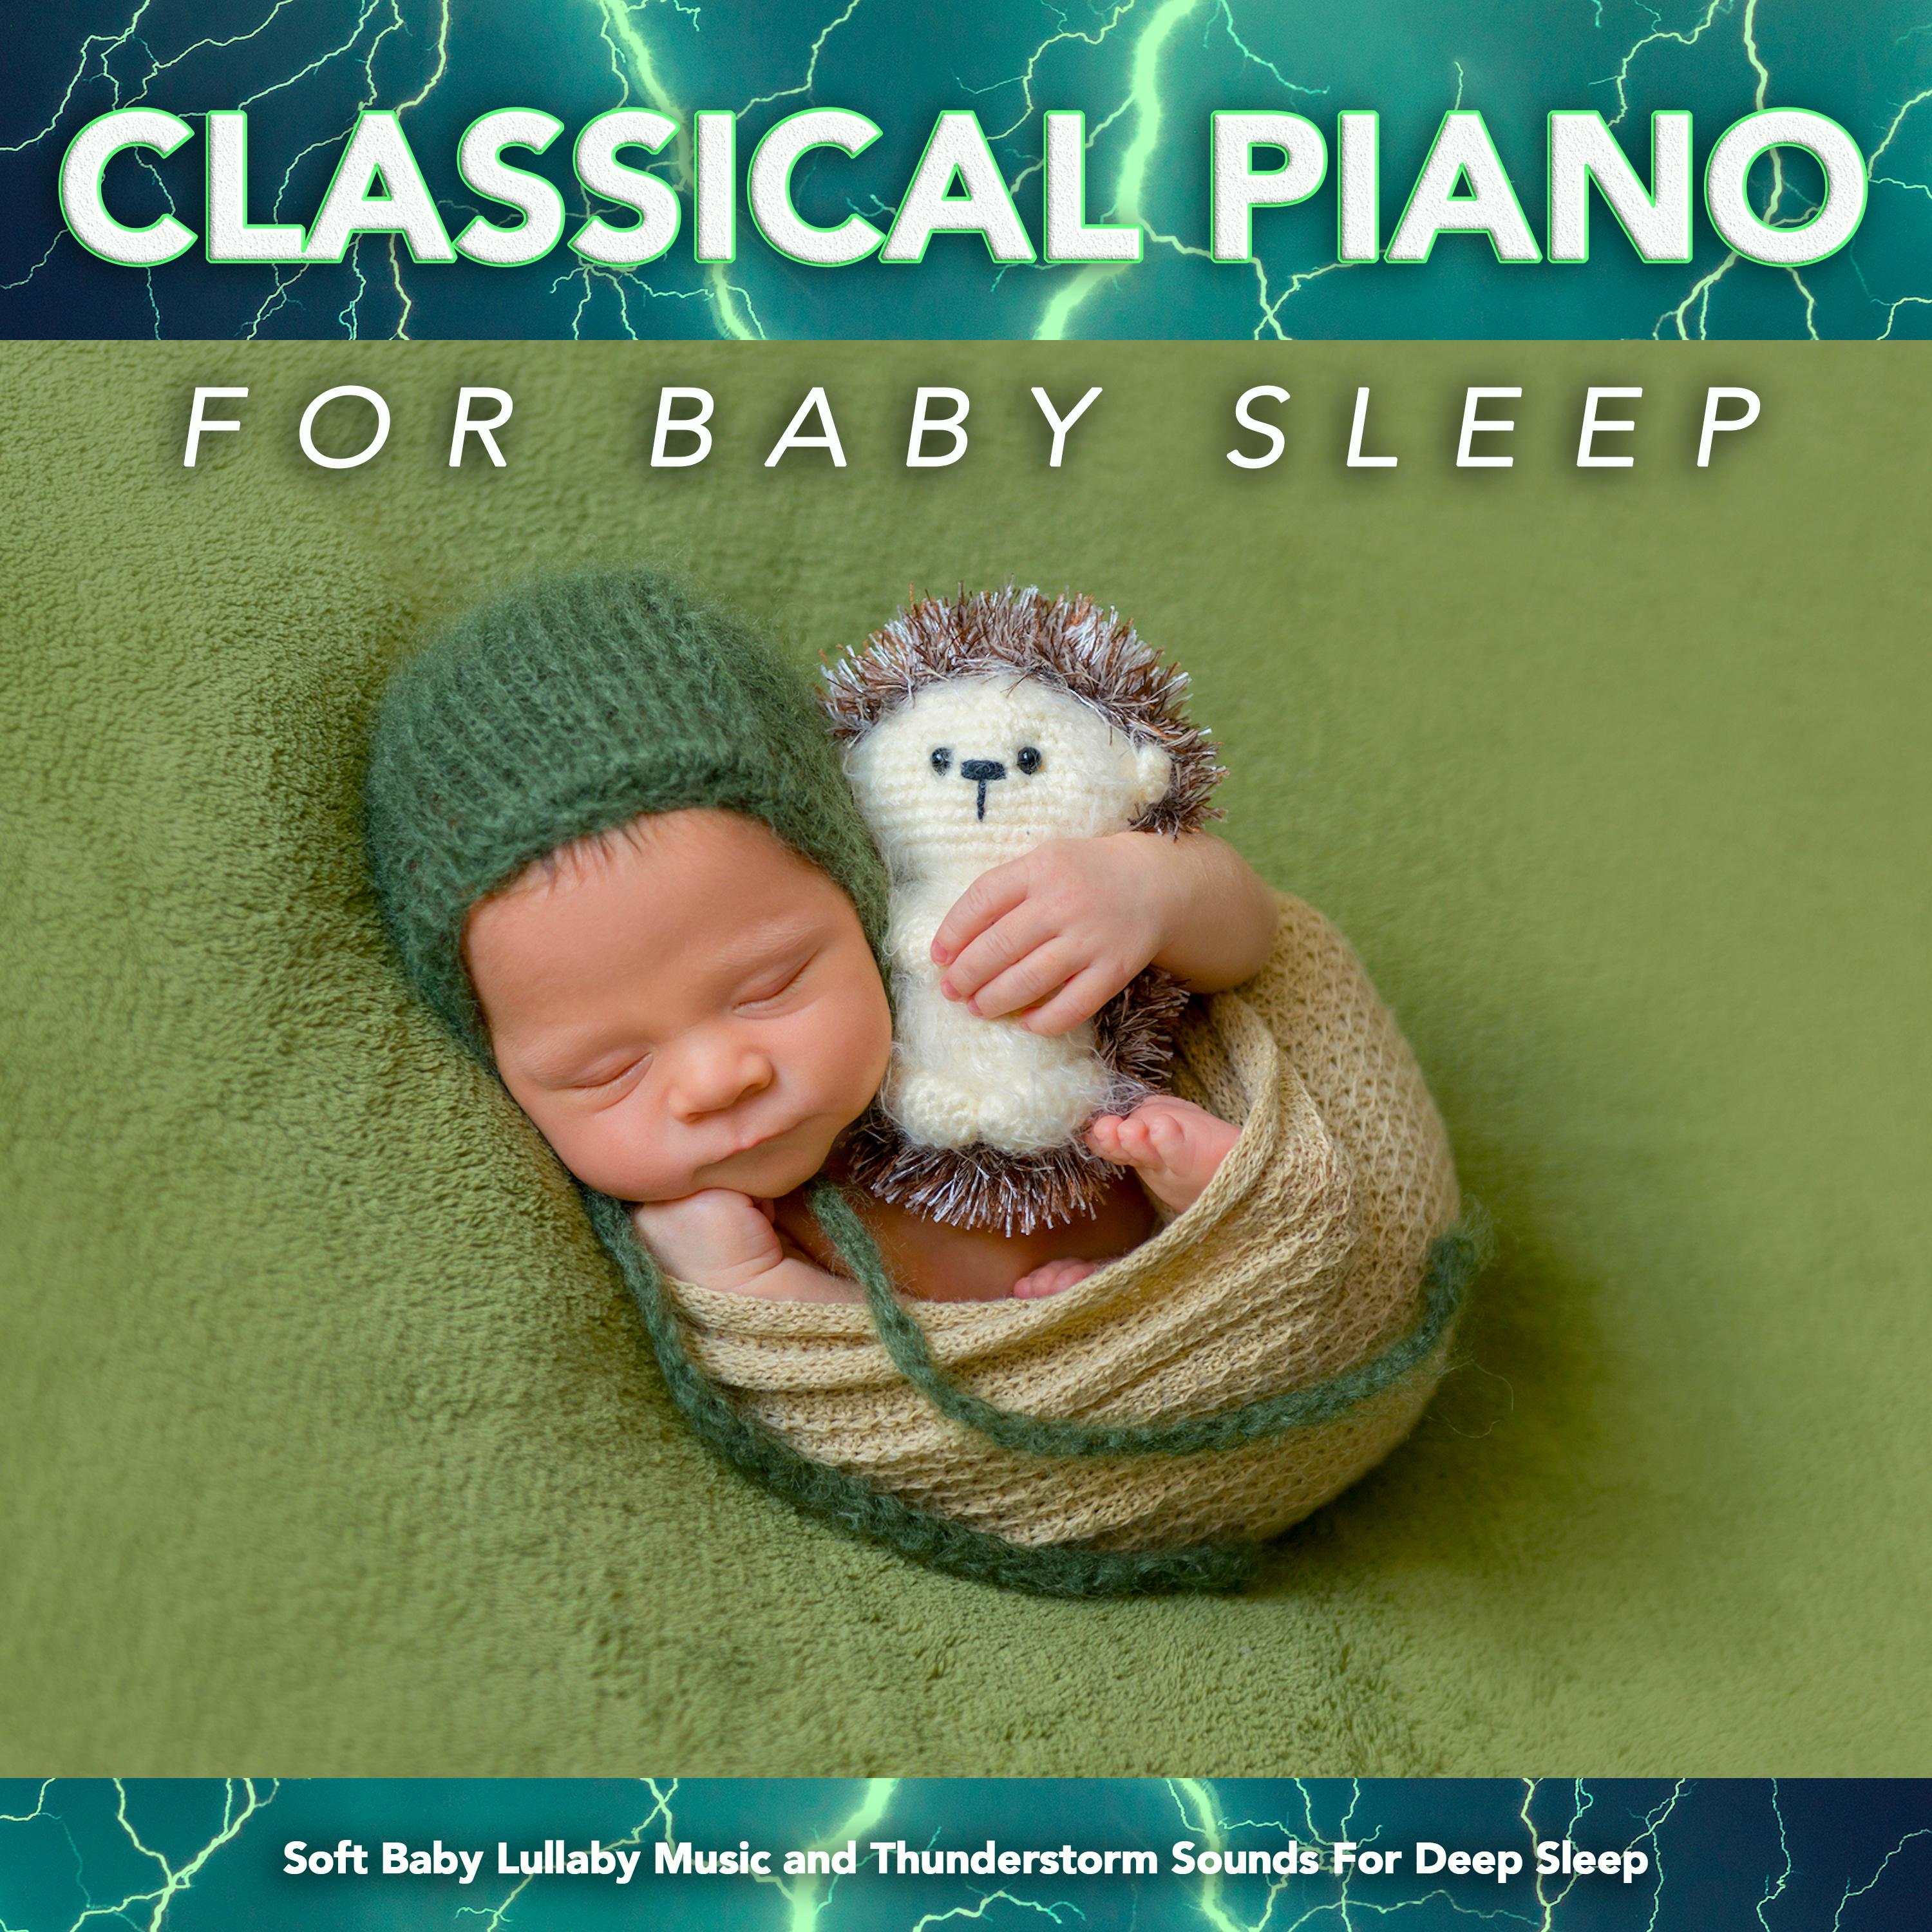 Prelude in Db - Chopin - Soft Baby Lullaby Music - Thunderstorm Sounds - Classical Piano for Baby Sleep